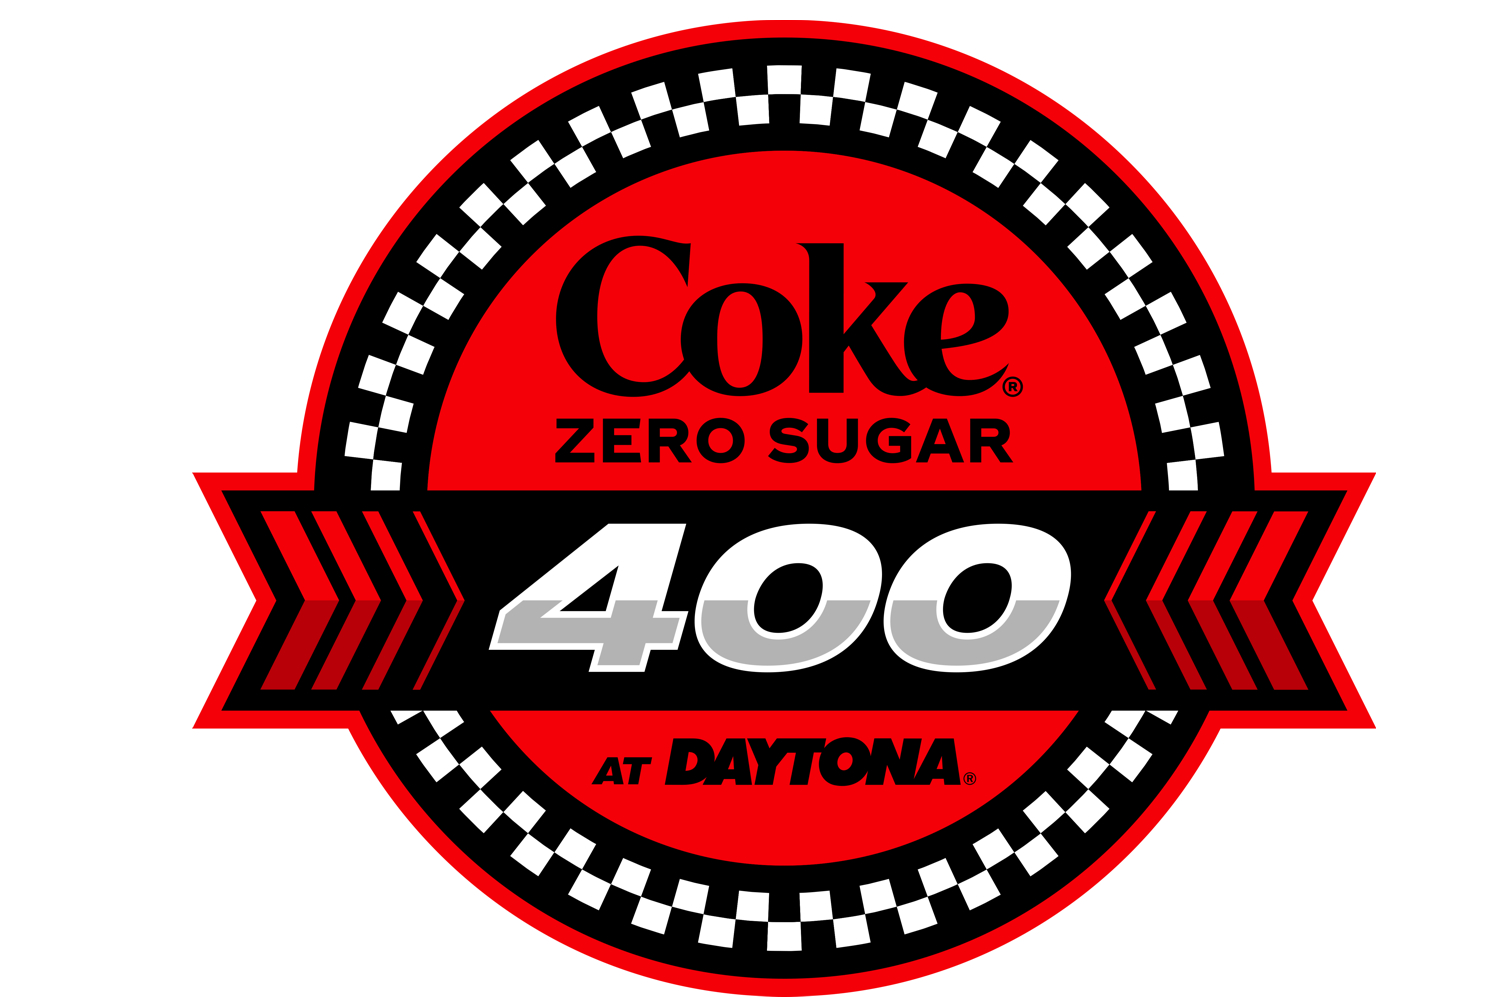 Erik Jones Finishes in the 12th-place at the Daytona International Speedway